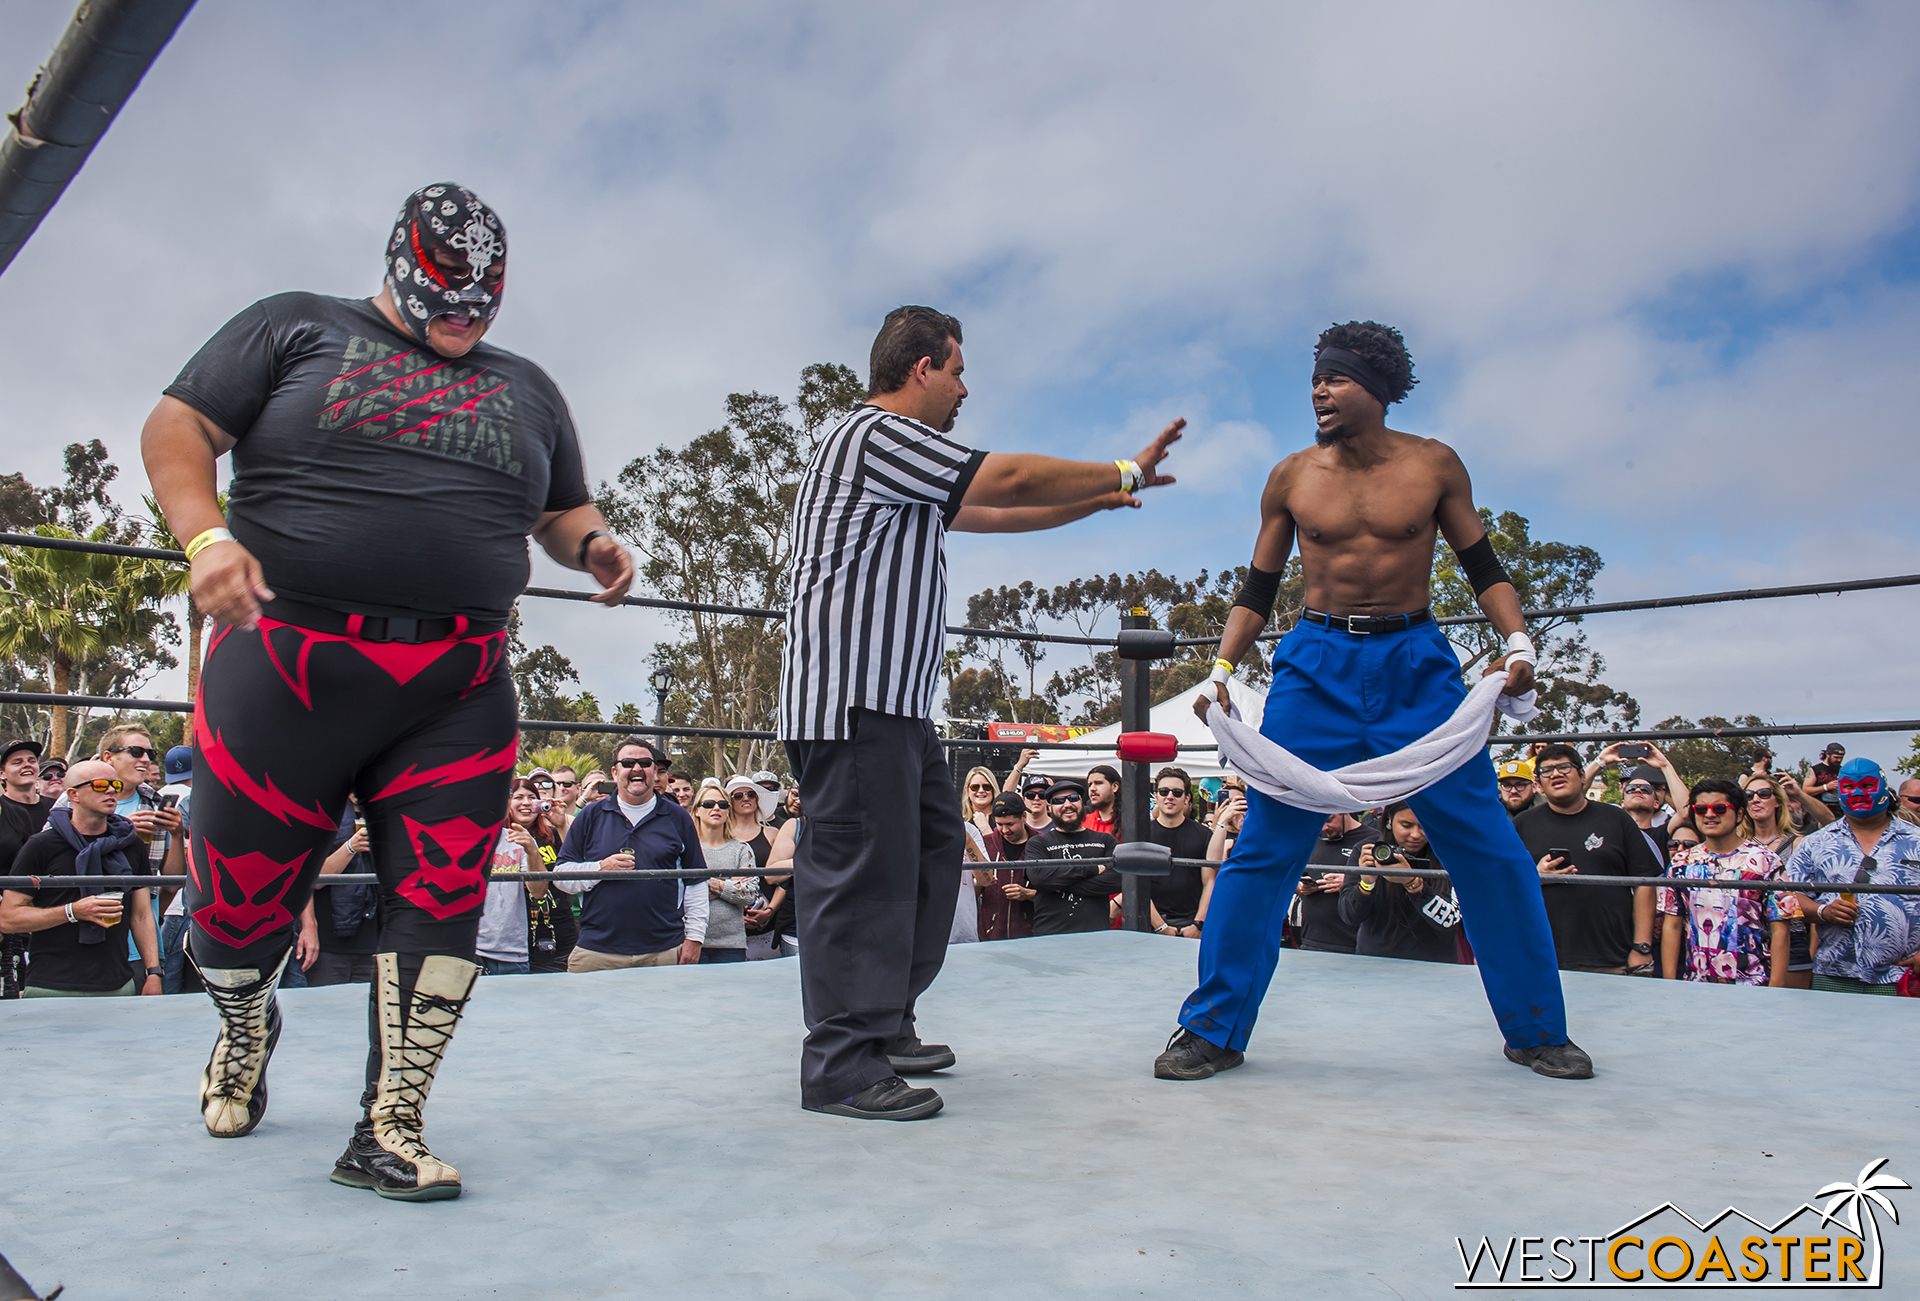  The festival showcased lucha libre wrestling once again this year. 